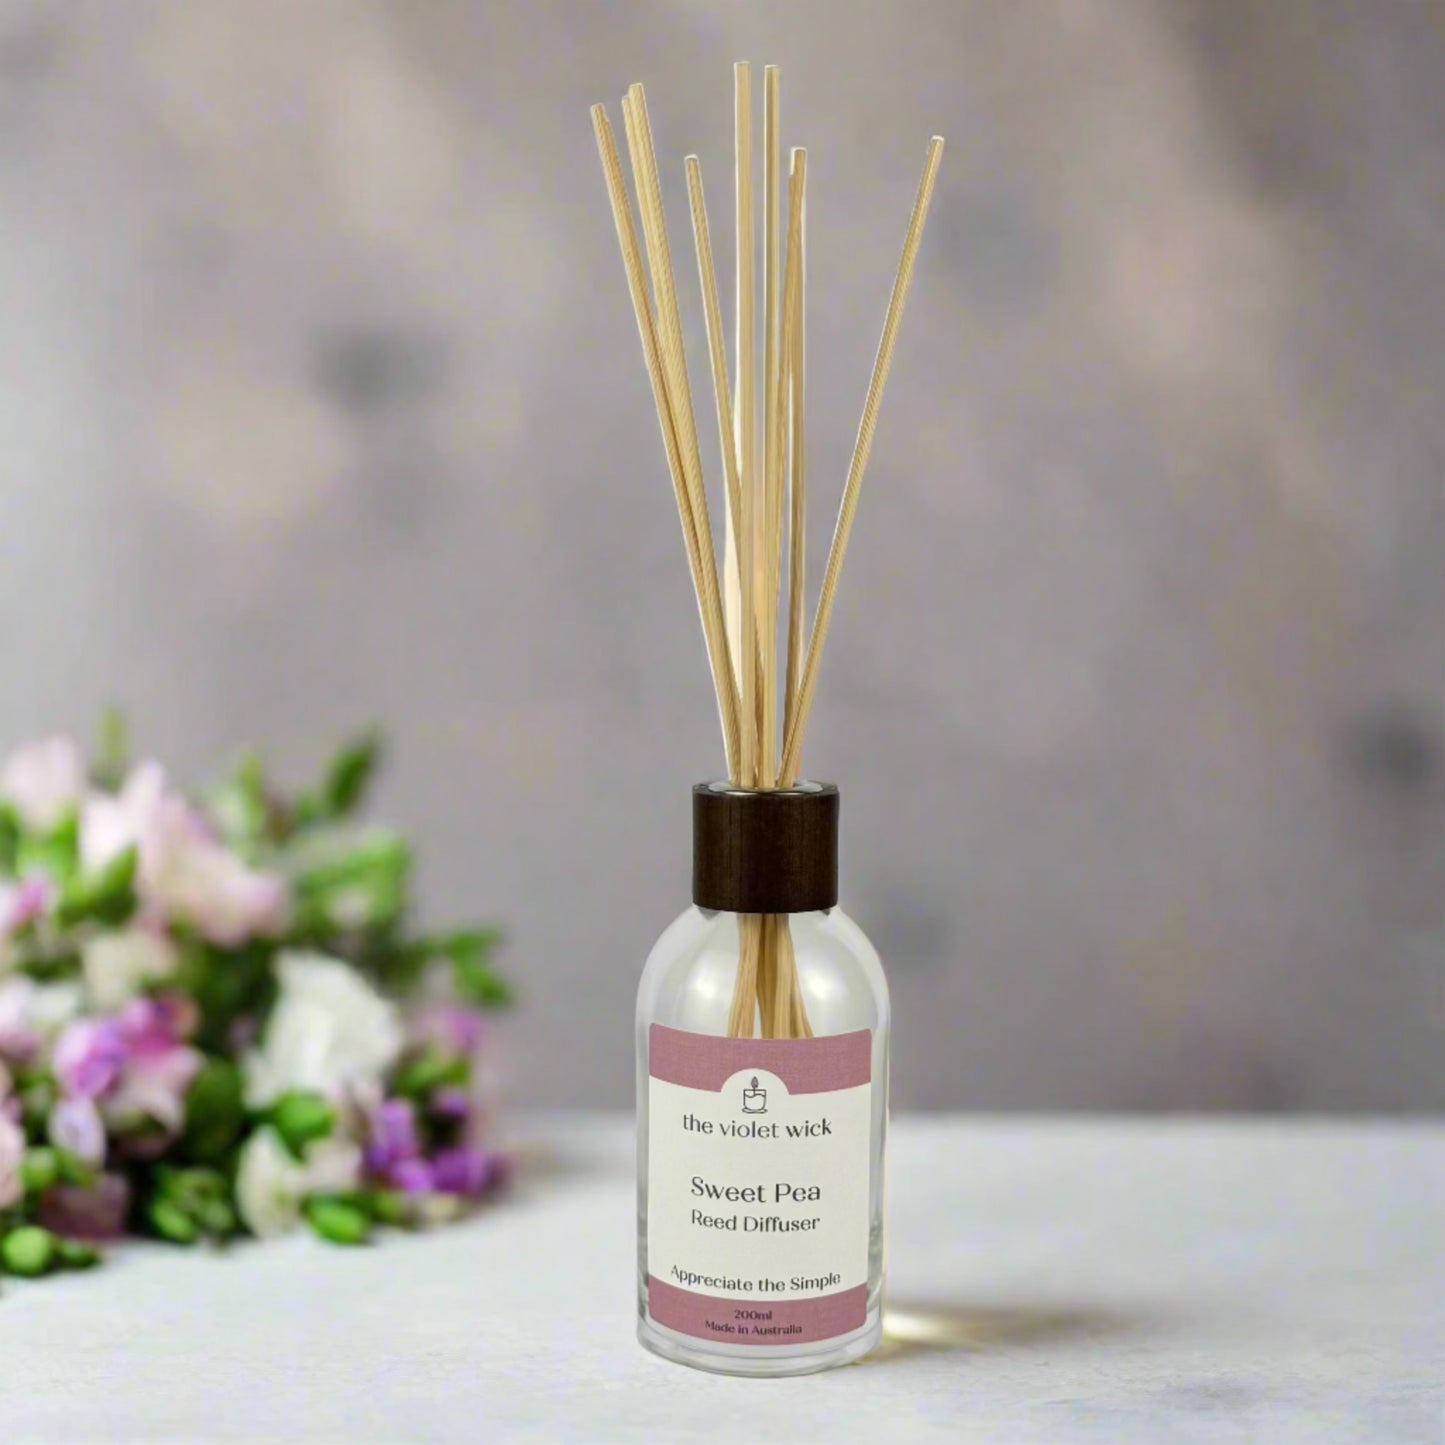 Sweet Pea reed diffuser from The Violet Wick